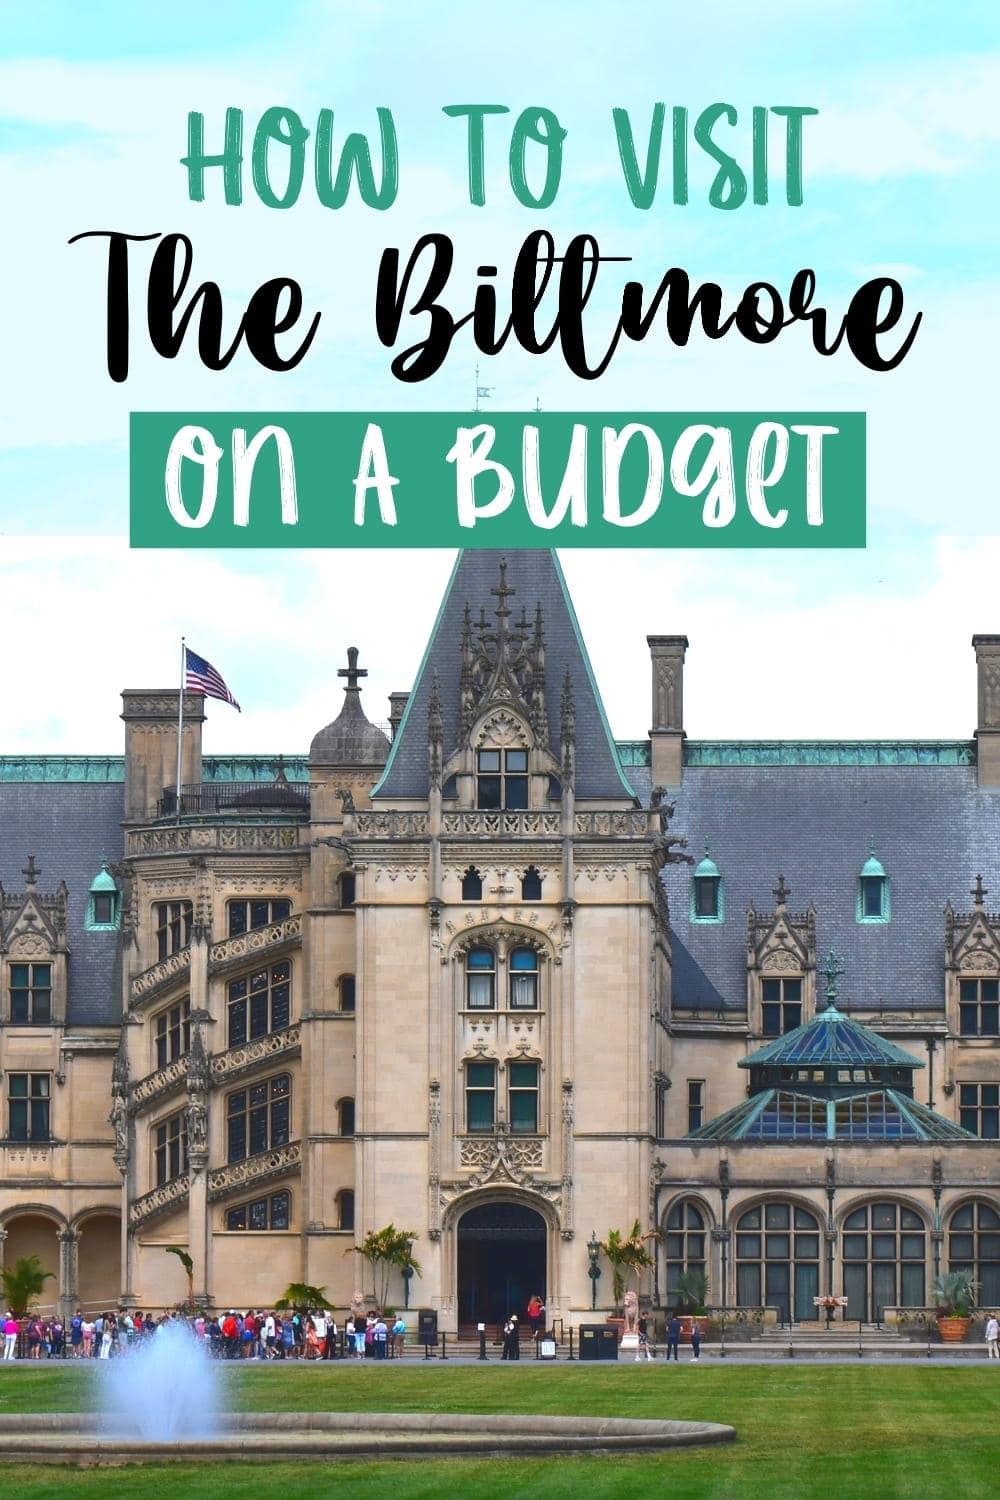 35 Useful Tips for Visiting the Biltmore Estate on a Budget